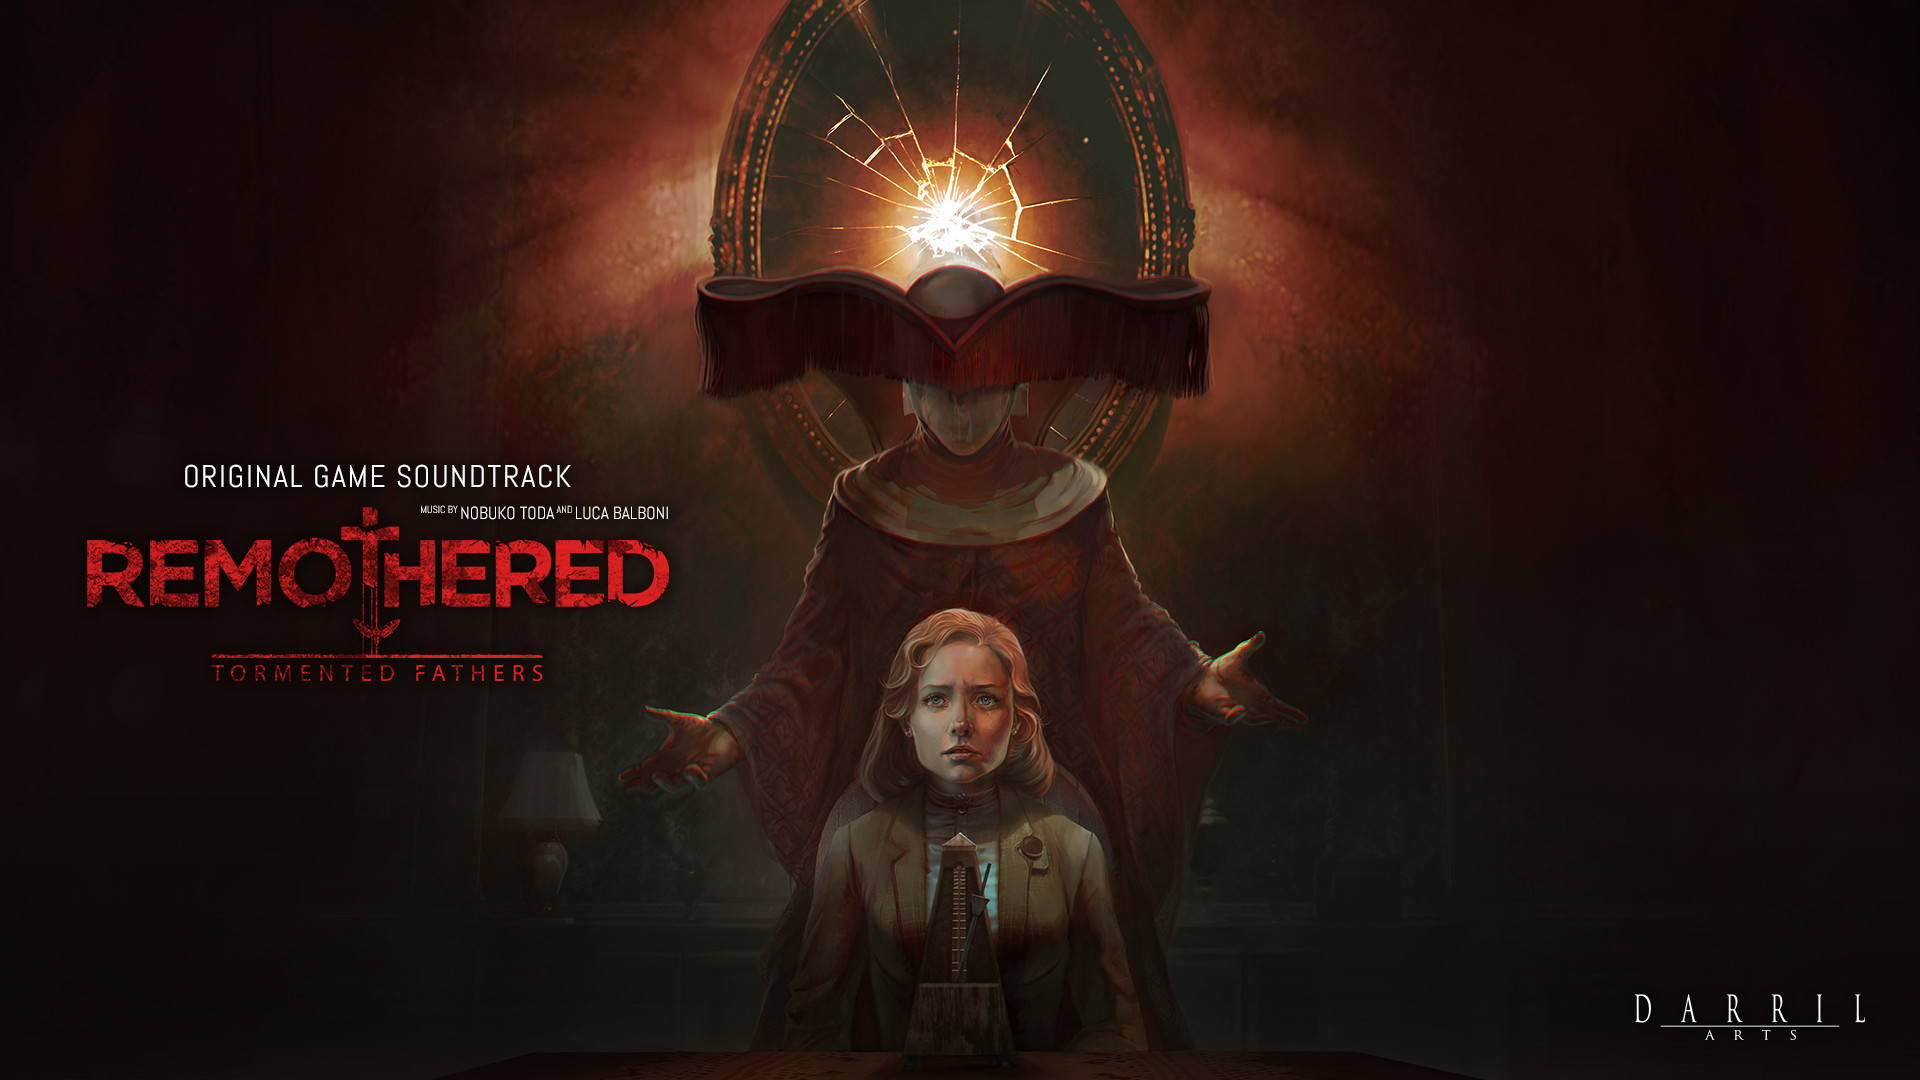 Remothered: Tormented Fathers - Original Soundtrack Featured Screenshot #1